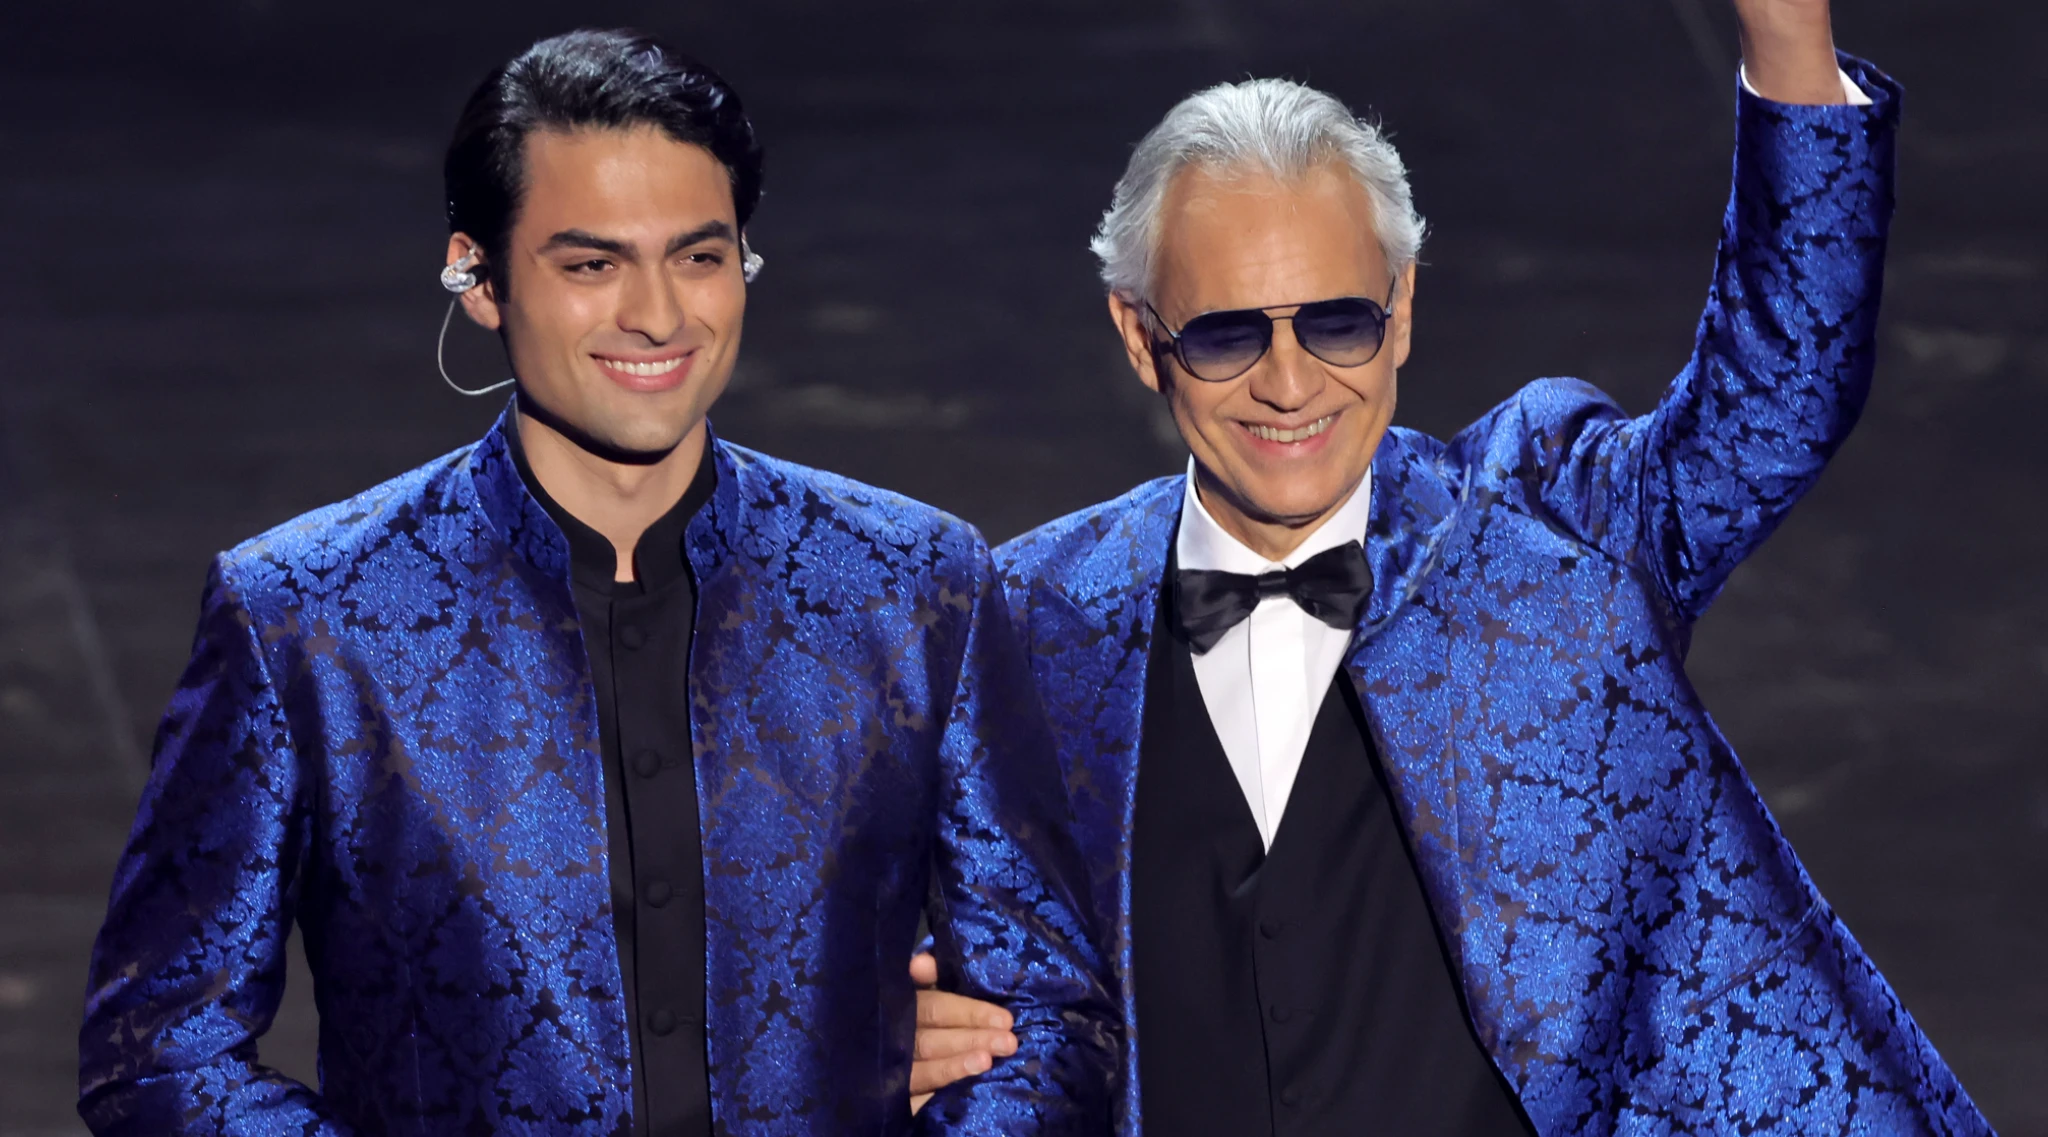 Andrea Bocelli on the 'Great Gift' of Performing With His Son at the 96th Oscars (Exclusive)